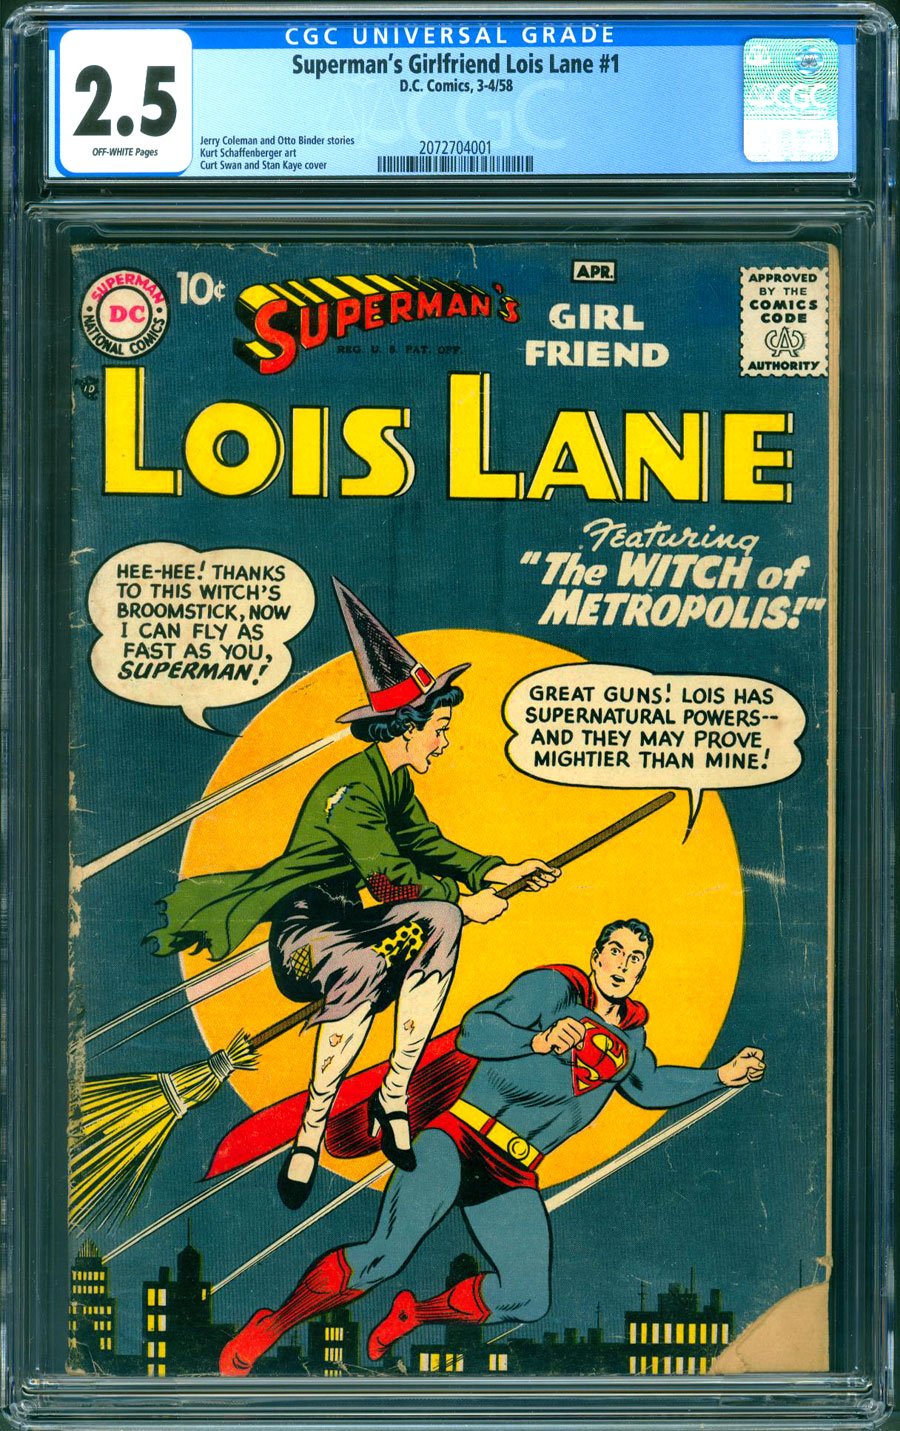 Lois Lane from DC Extended Universe